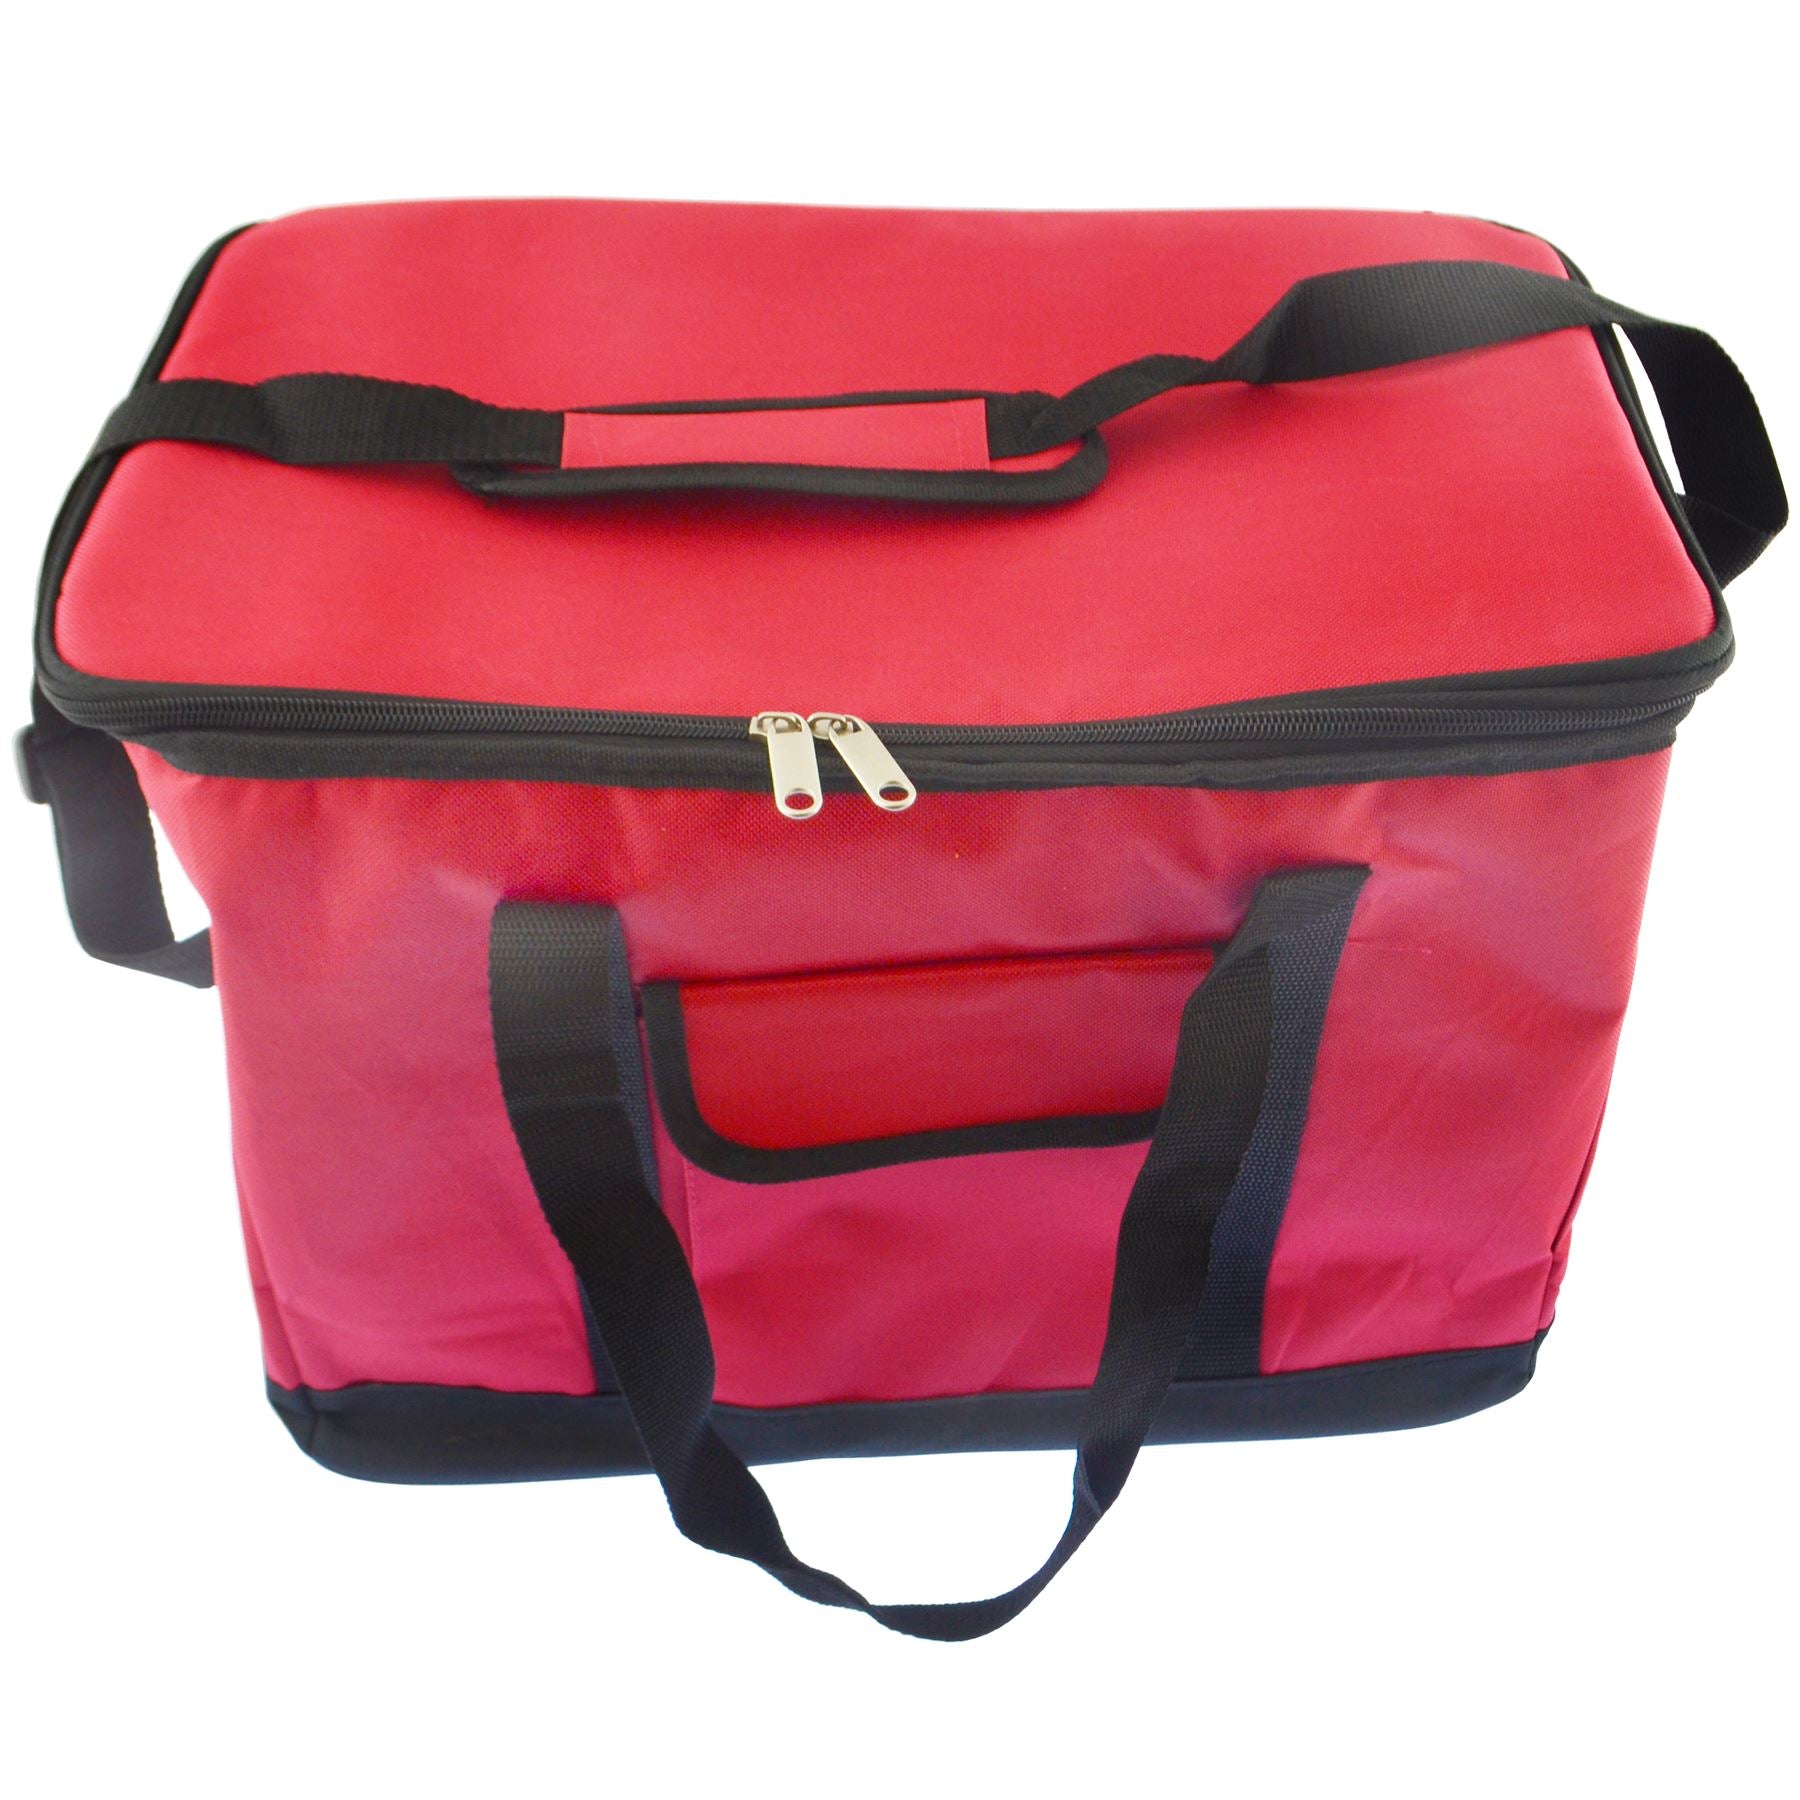 30L Cool Bag With Strap Ice Cooler Picnic Pizza Delivery Hot Food Carrier Camping